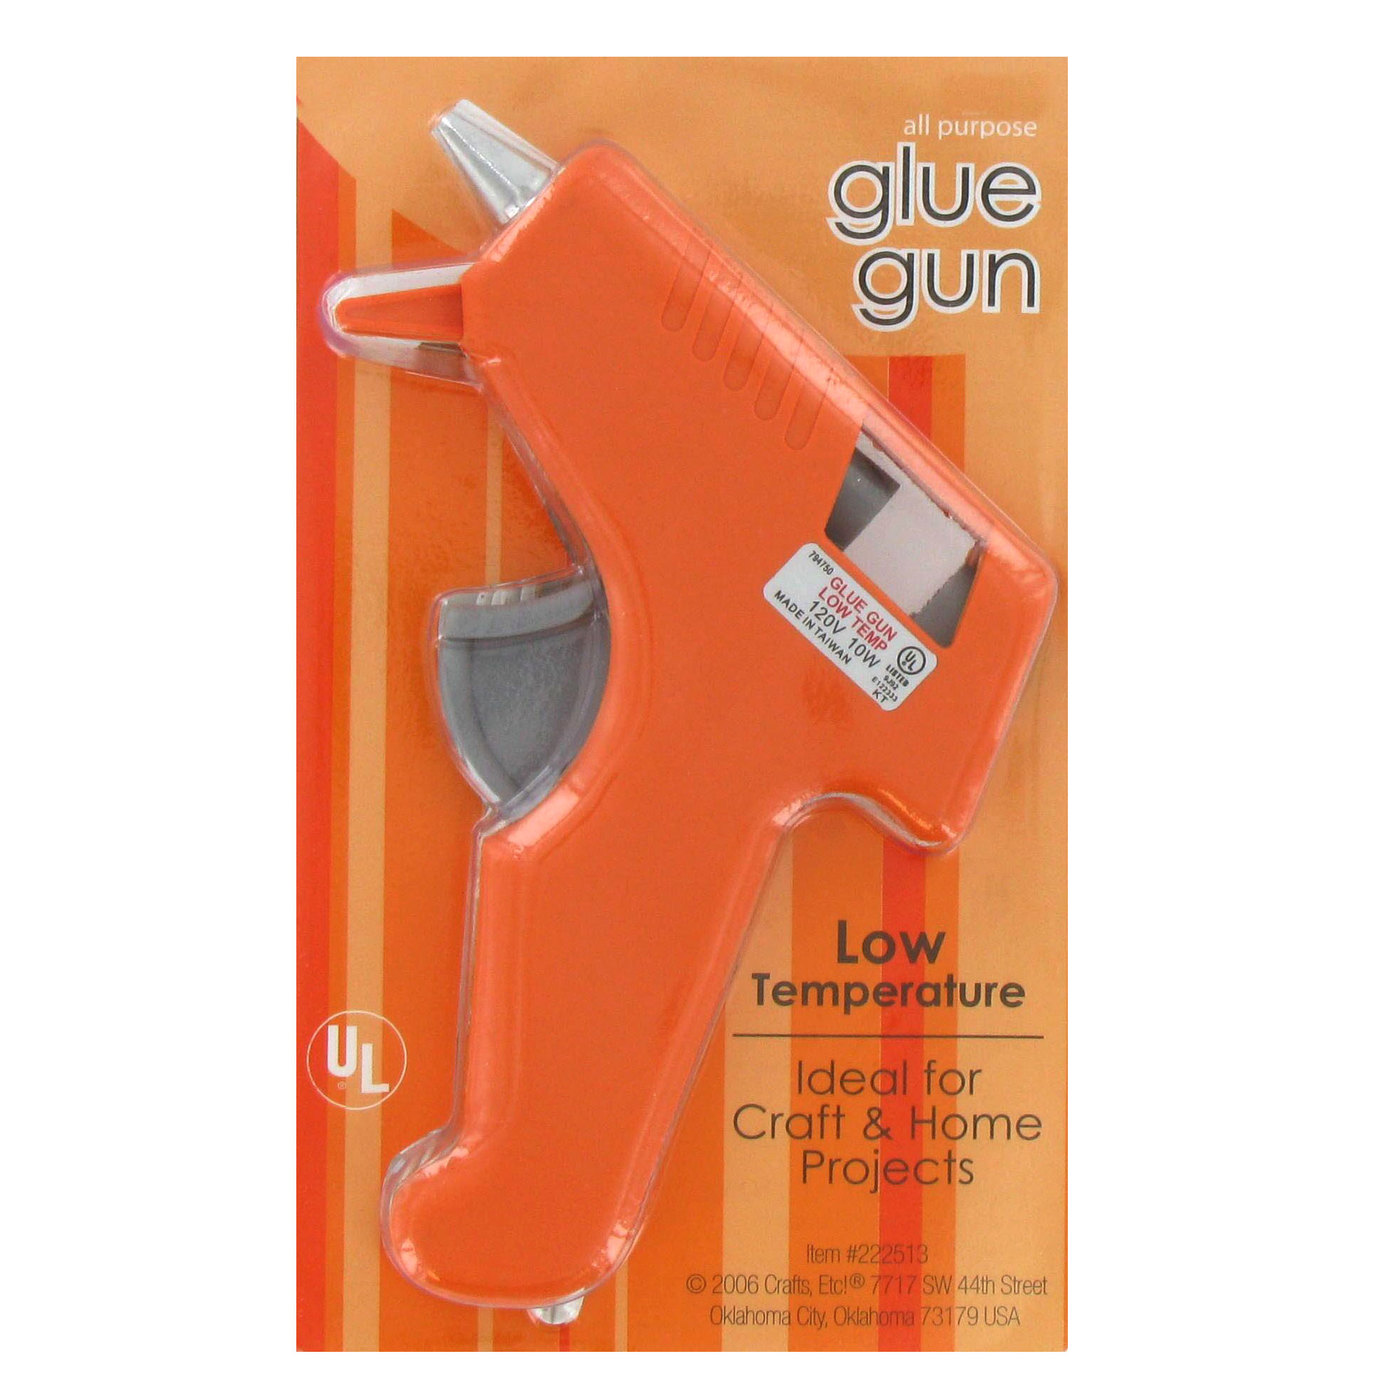 What Are Low Temp Glue Guns Used For